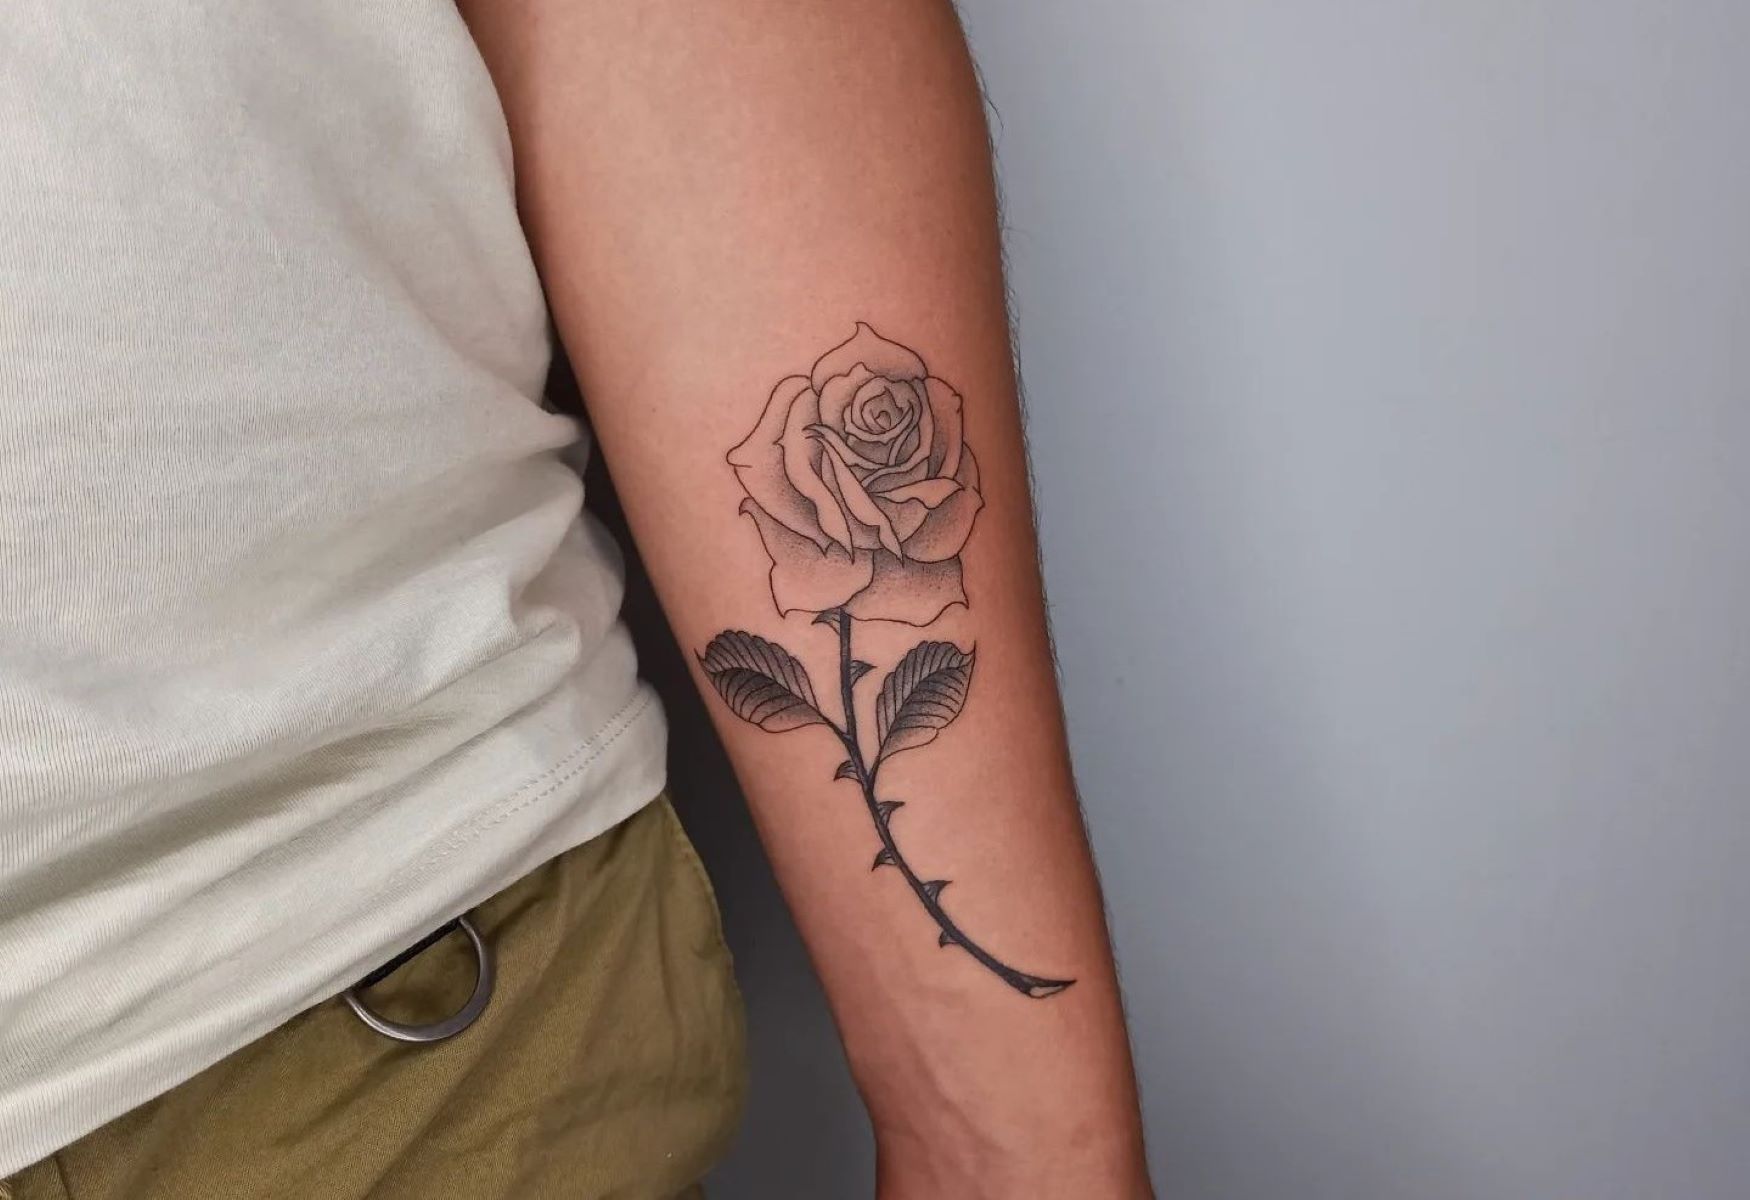 10 Stunning Tattoo Ideas To Complete Your Rose Sleeve